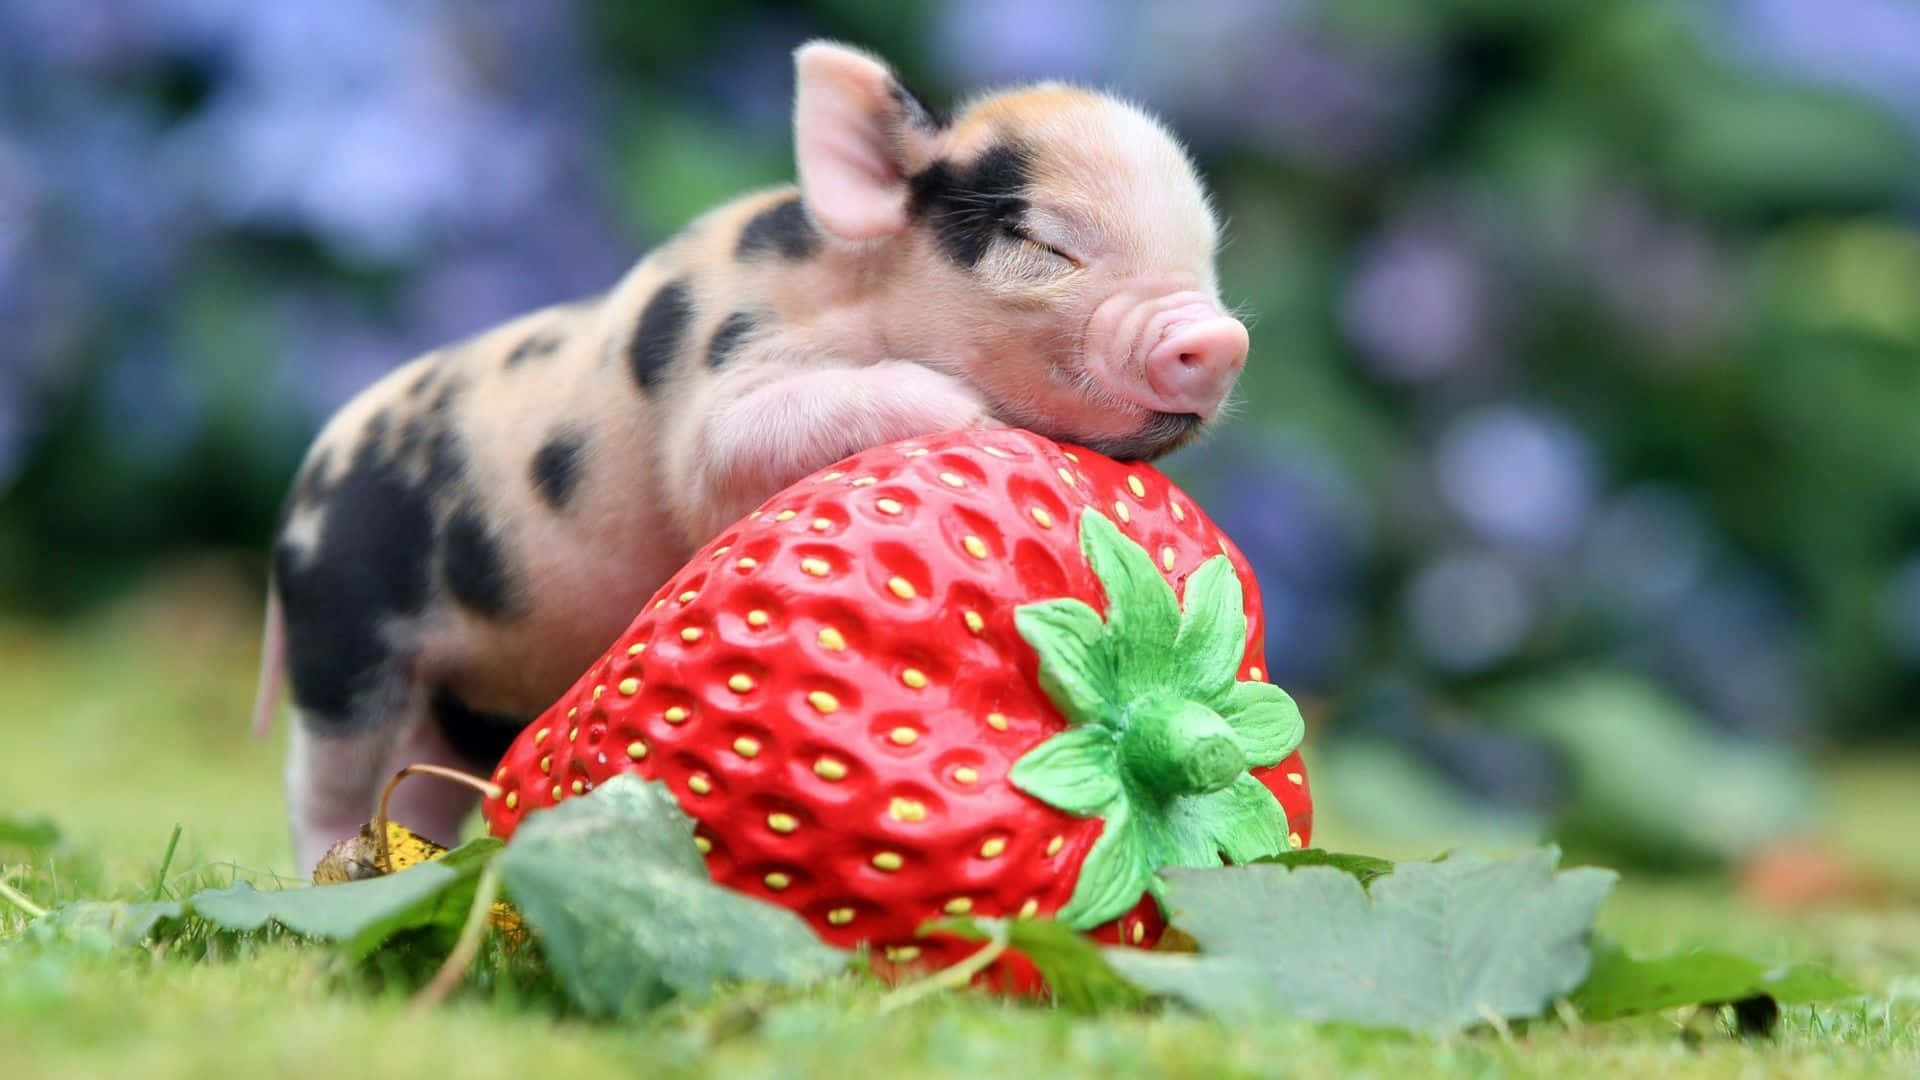 Adorable Piglet Frolicking In The Field